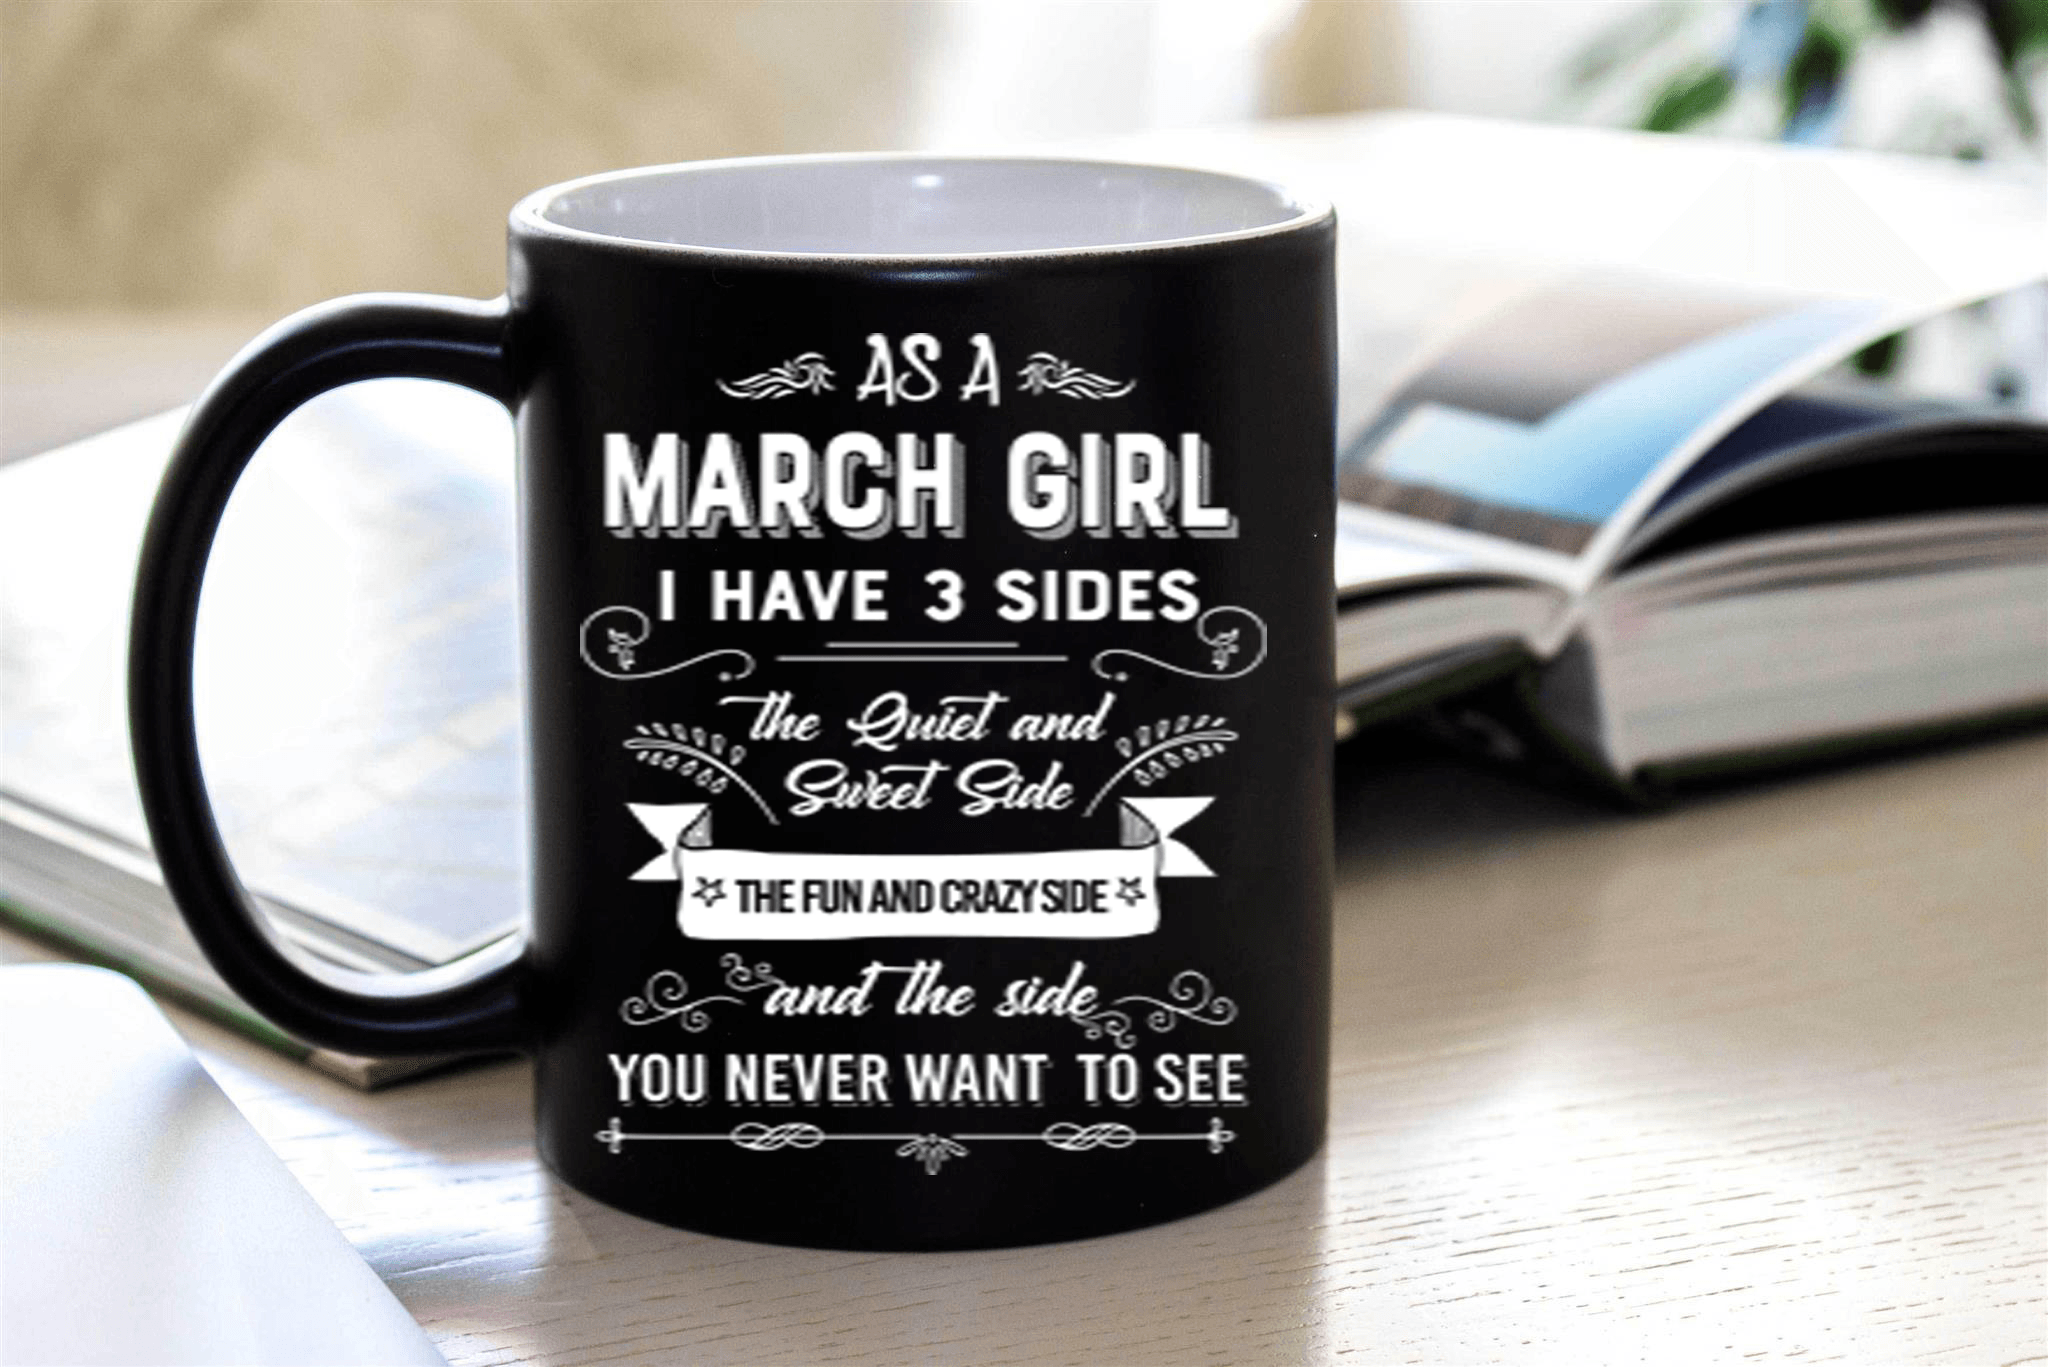 "As A March Girl I have Three Sides The Quite And Sweet side"